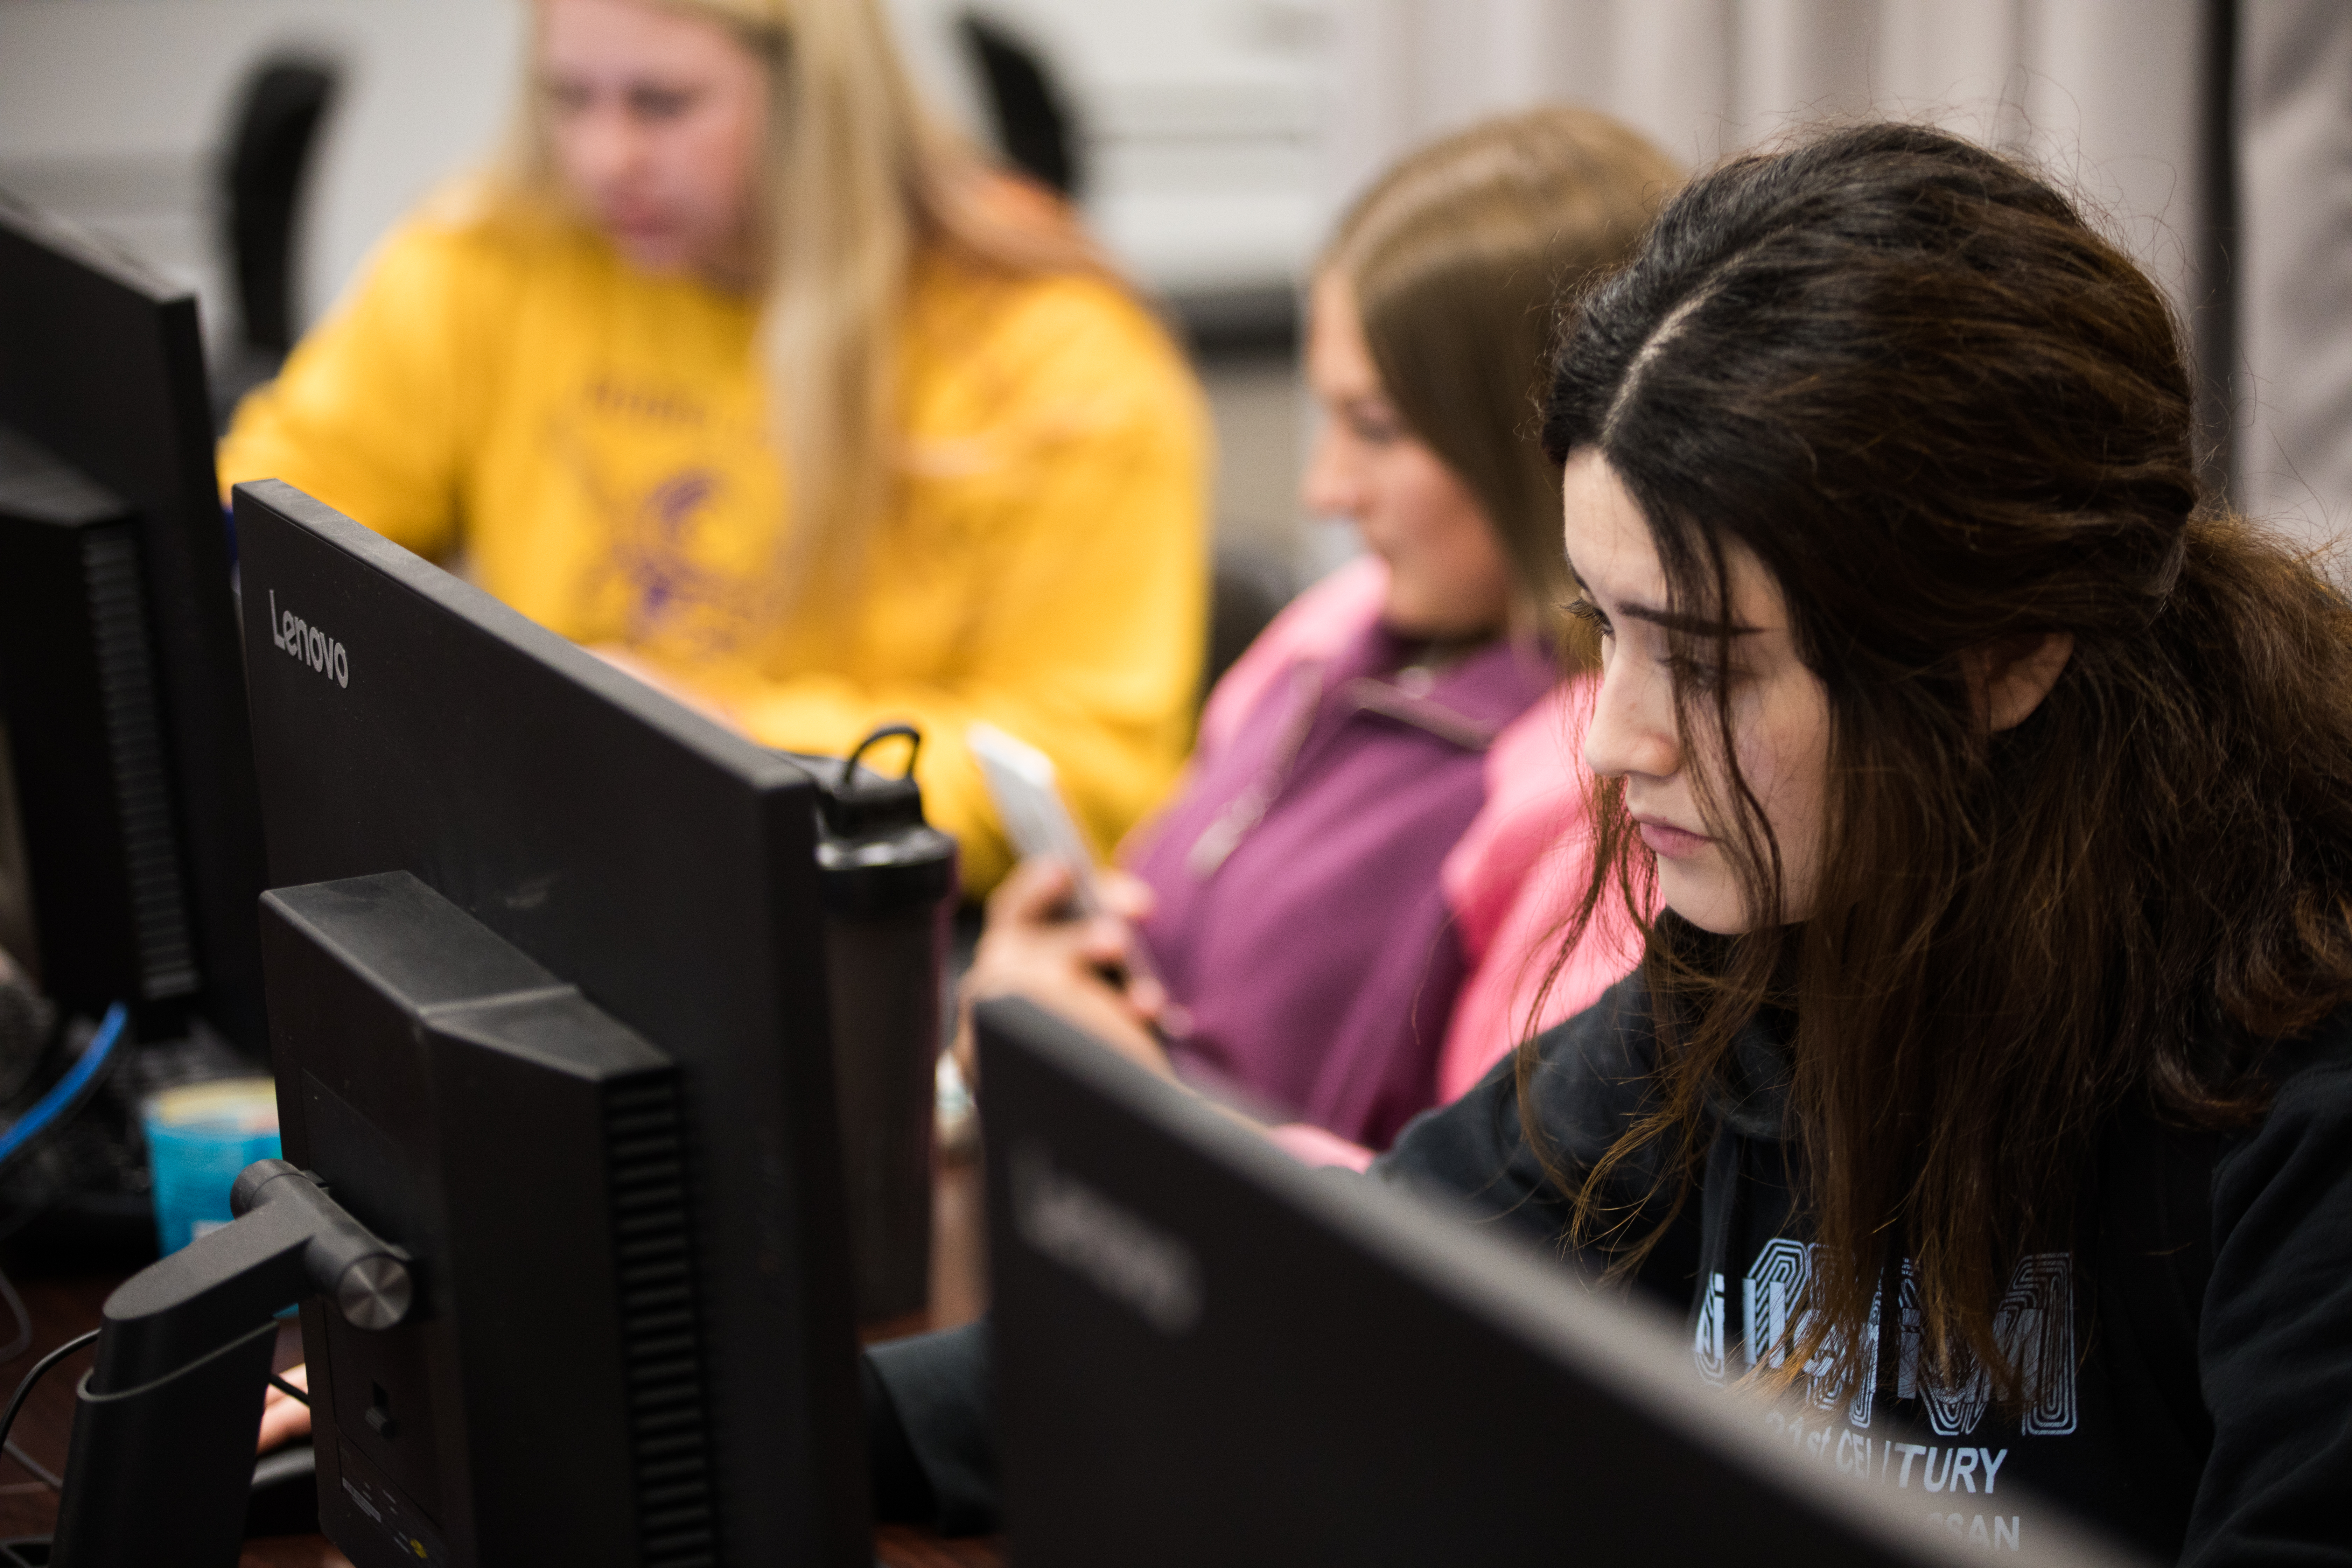 Students work in the computer lab during class